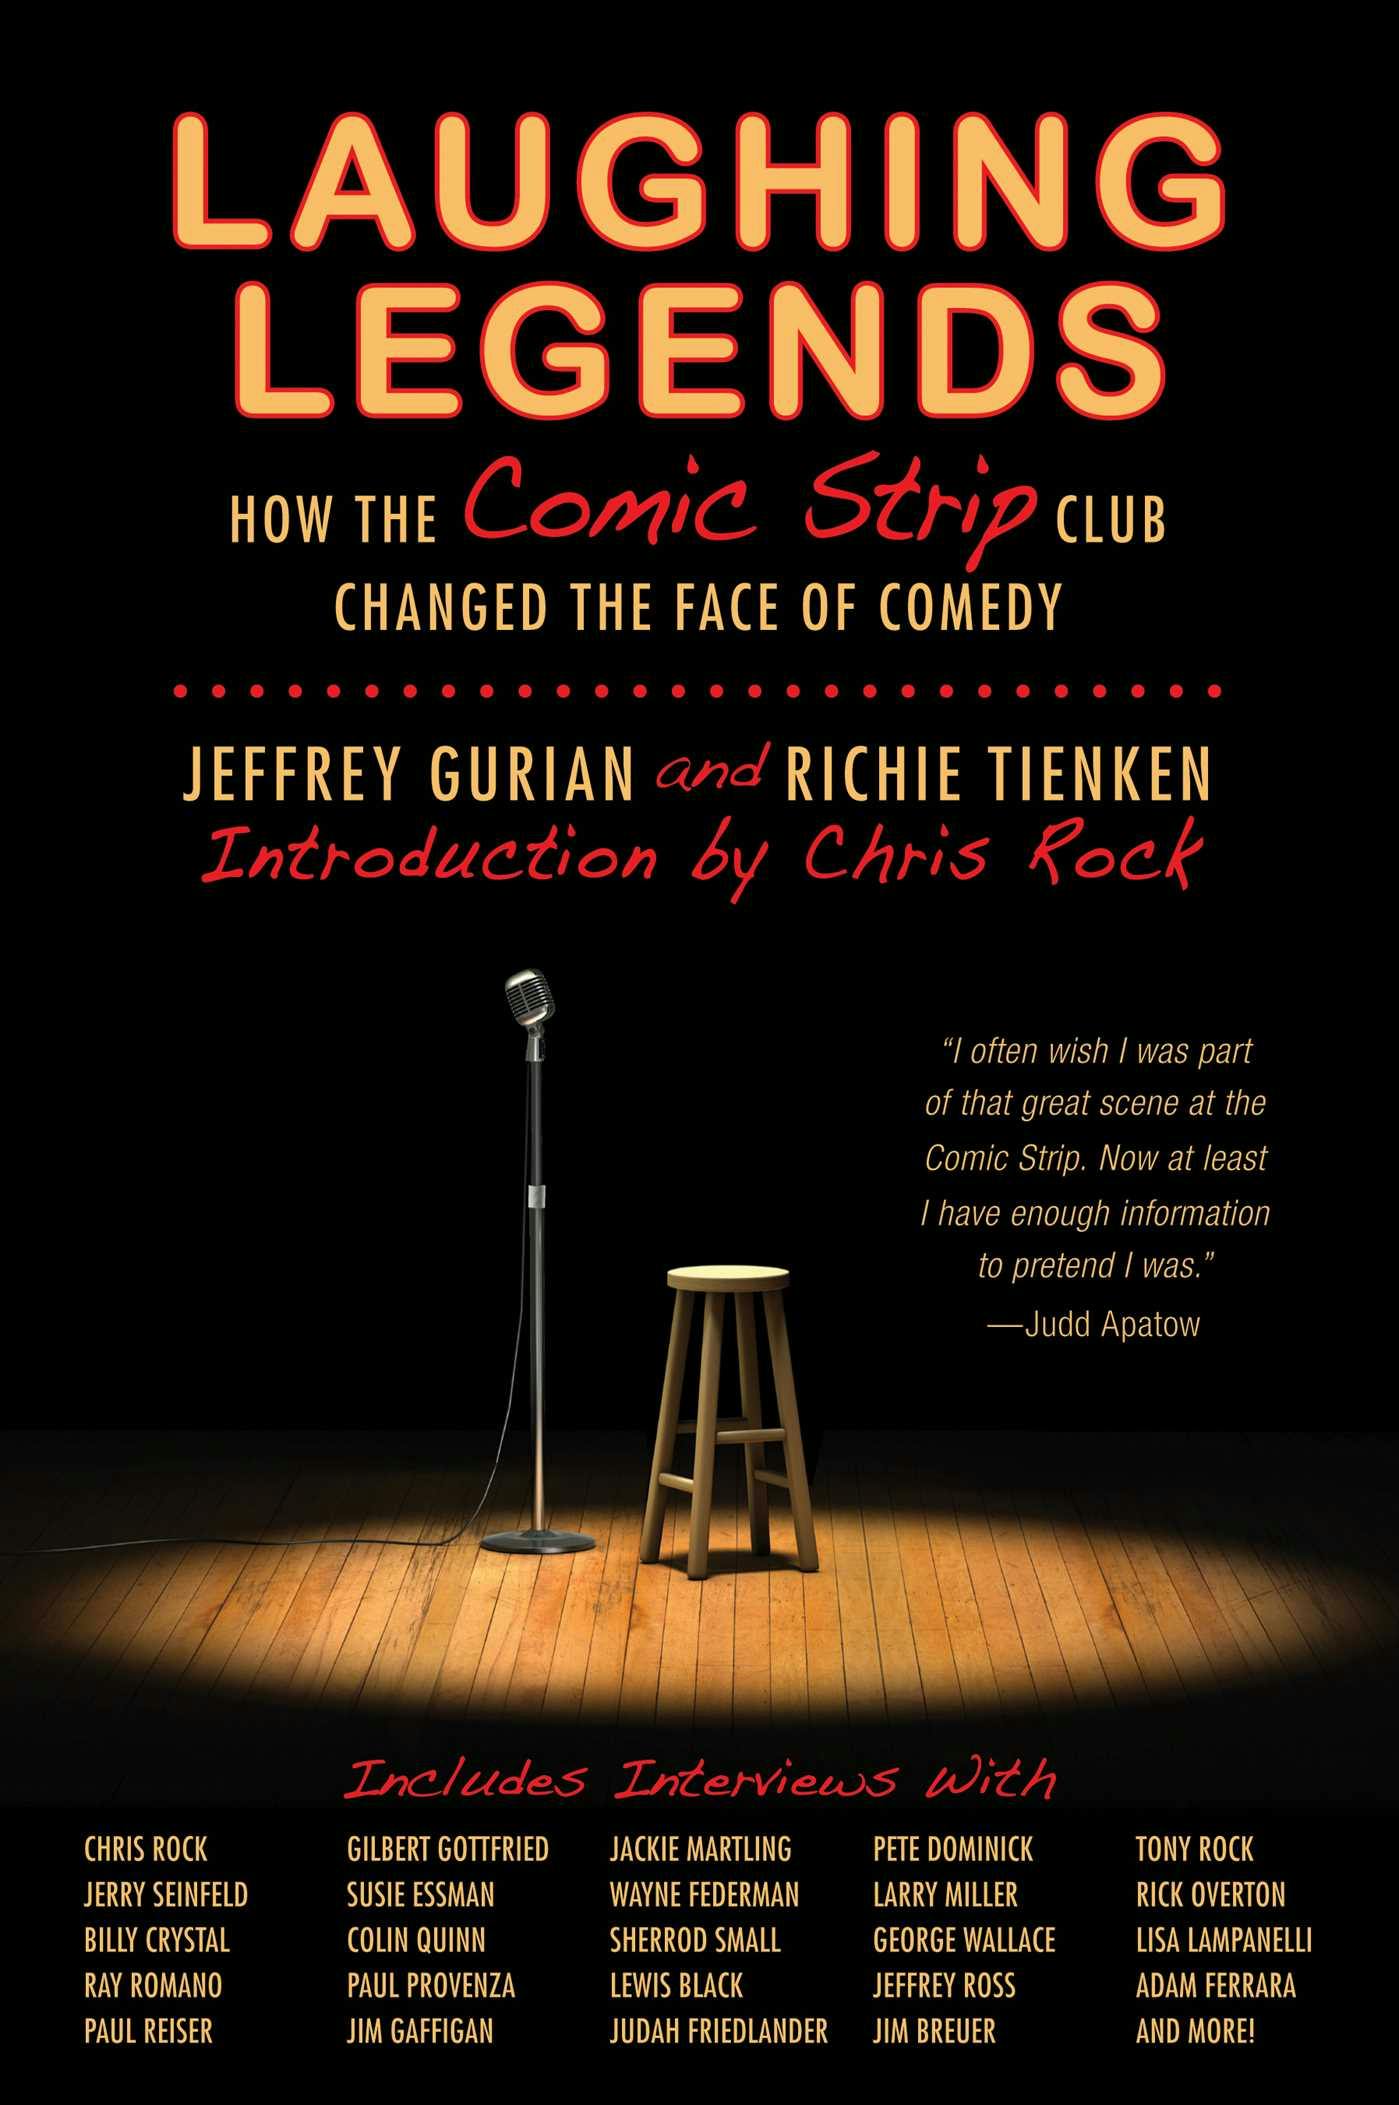 Laughing Legends: How The Comic Strip Club Changed The Face of Comedy - Jeffrey Gurian, Richie Tienken